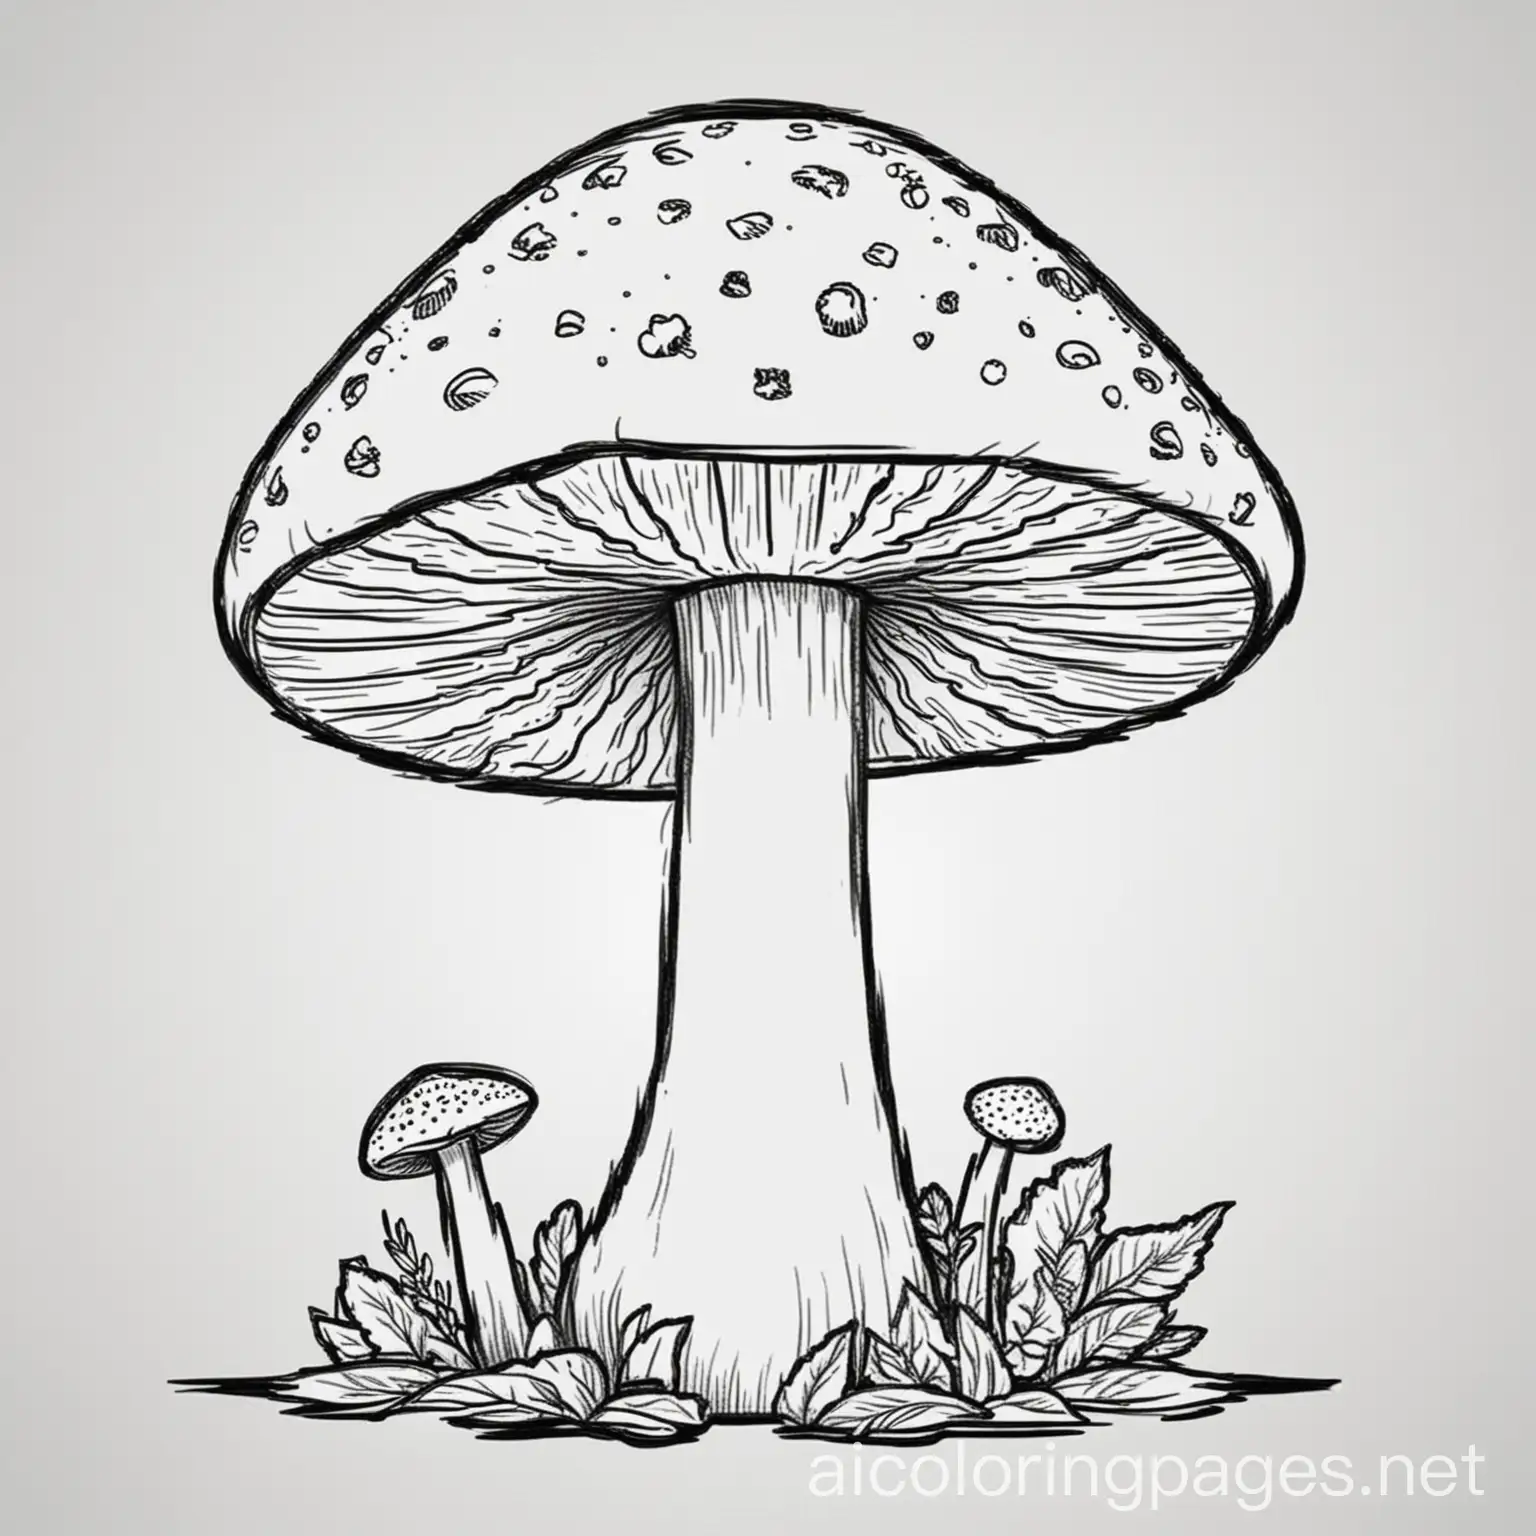 Simple-Mushroom-Coloring-Page-for-Kids-Black-and-White-Line-Art